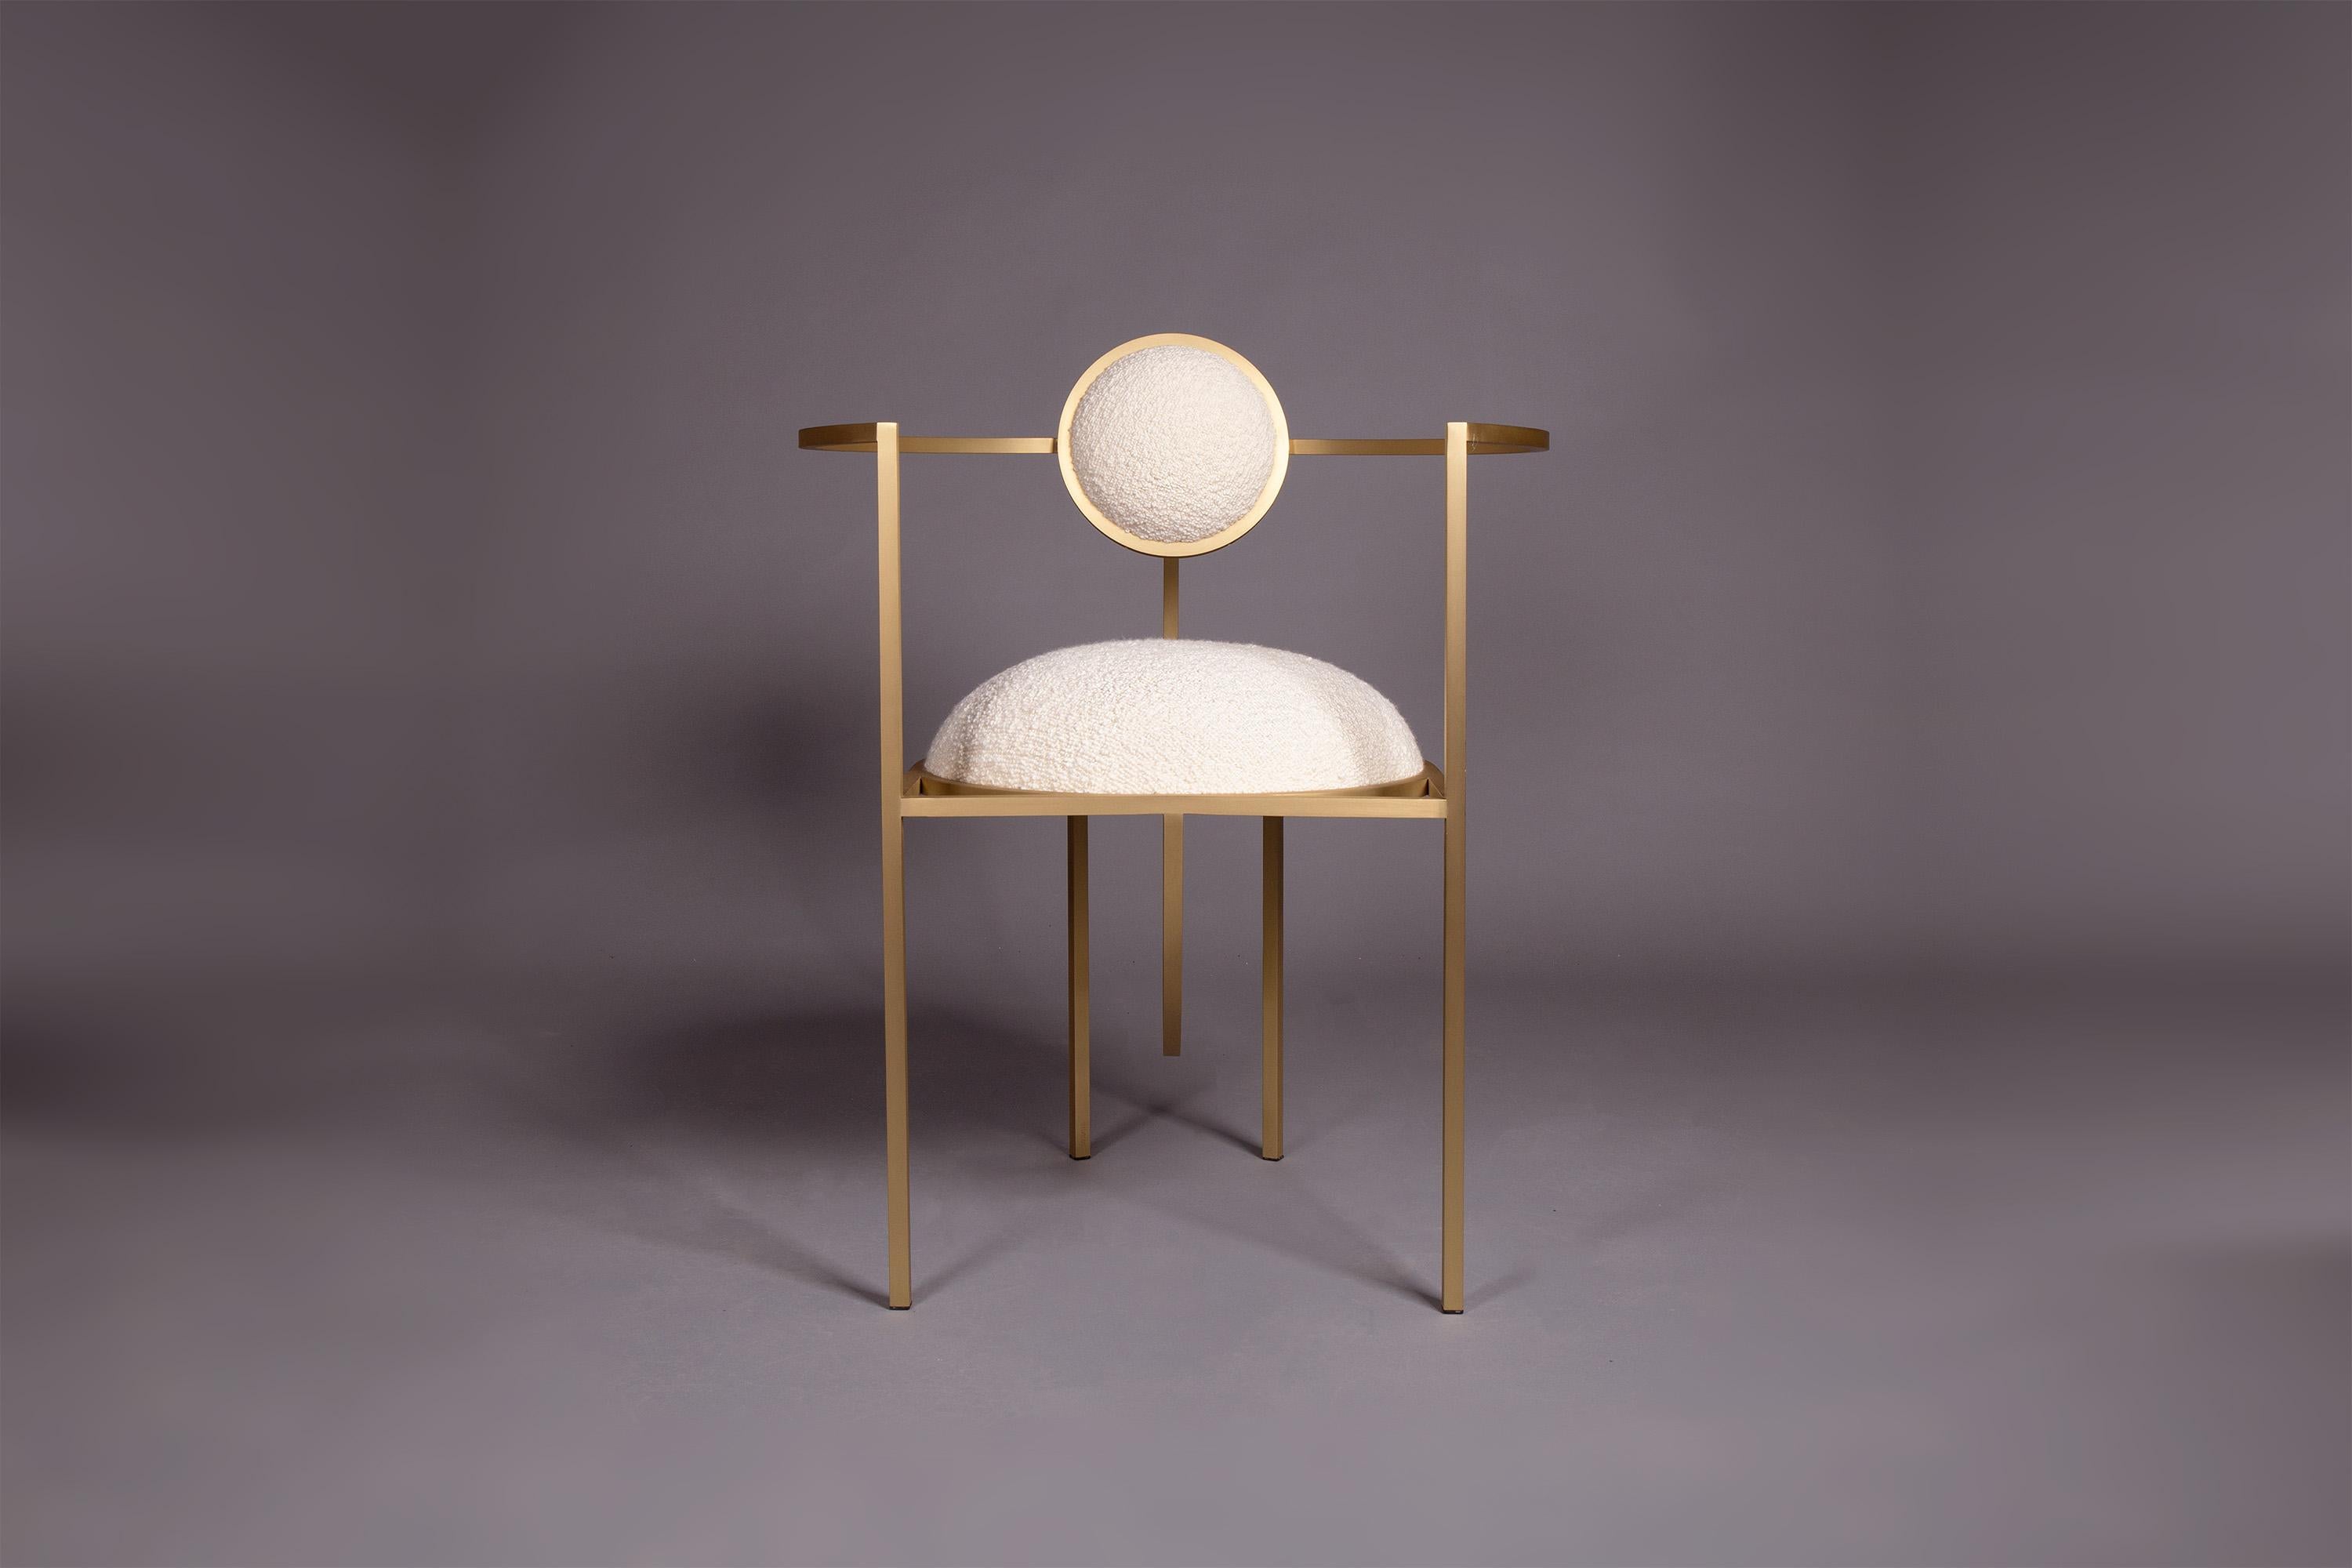 Portuguese Lunar Chair in Cream Boucle Wool Fabric and Brushed Brass, by Lara Bohinc For Sale